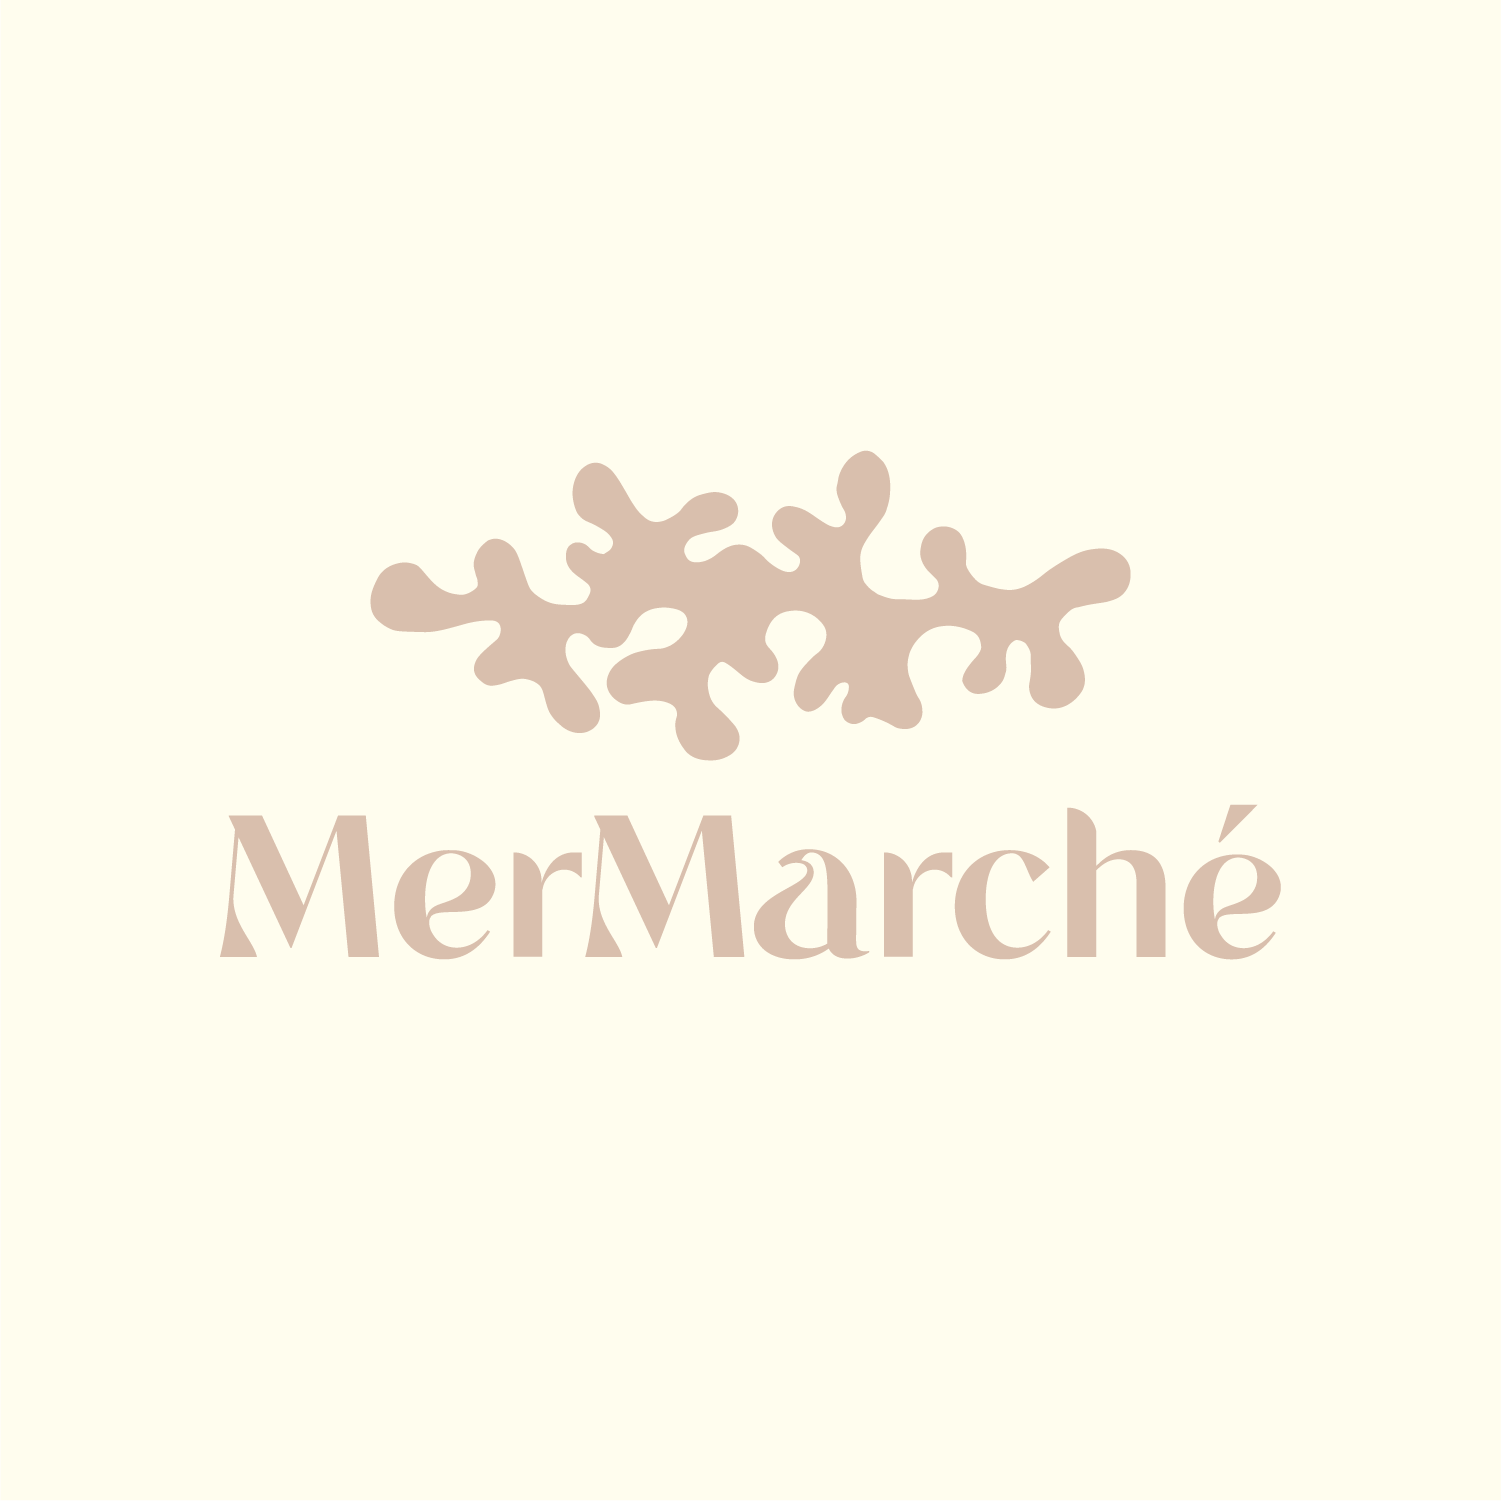 mermarche_square_large-01.png